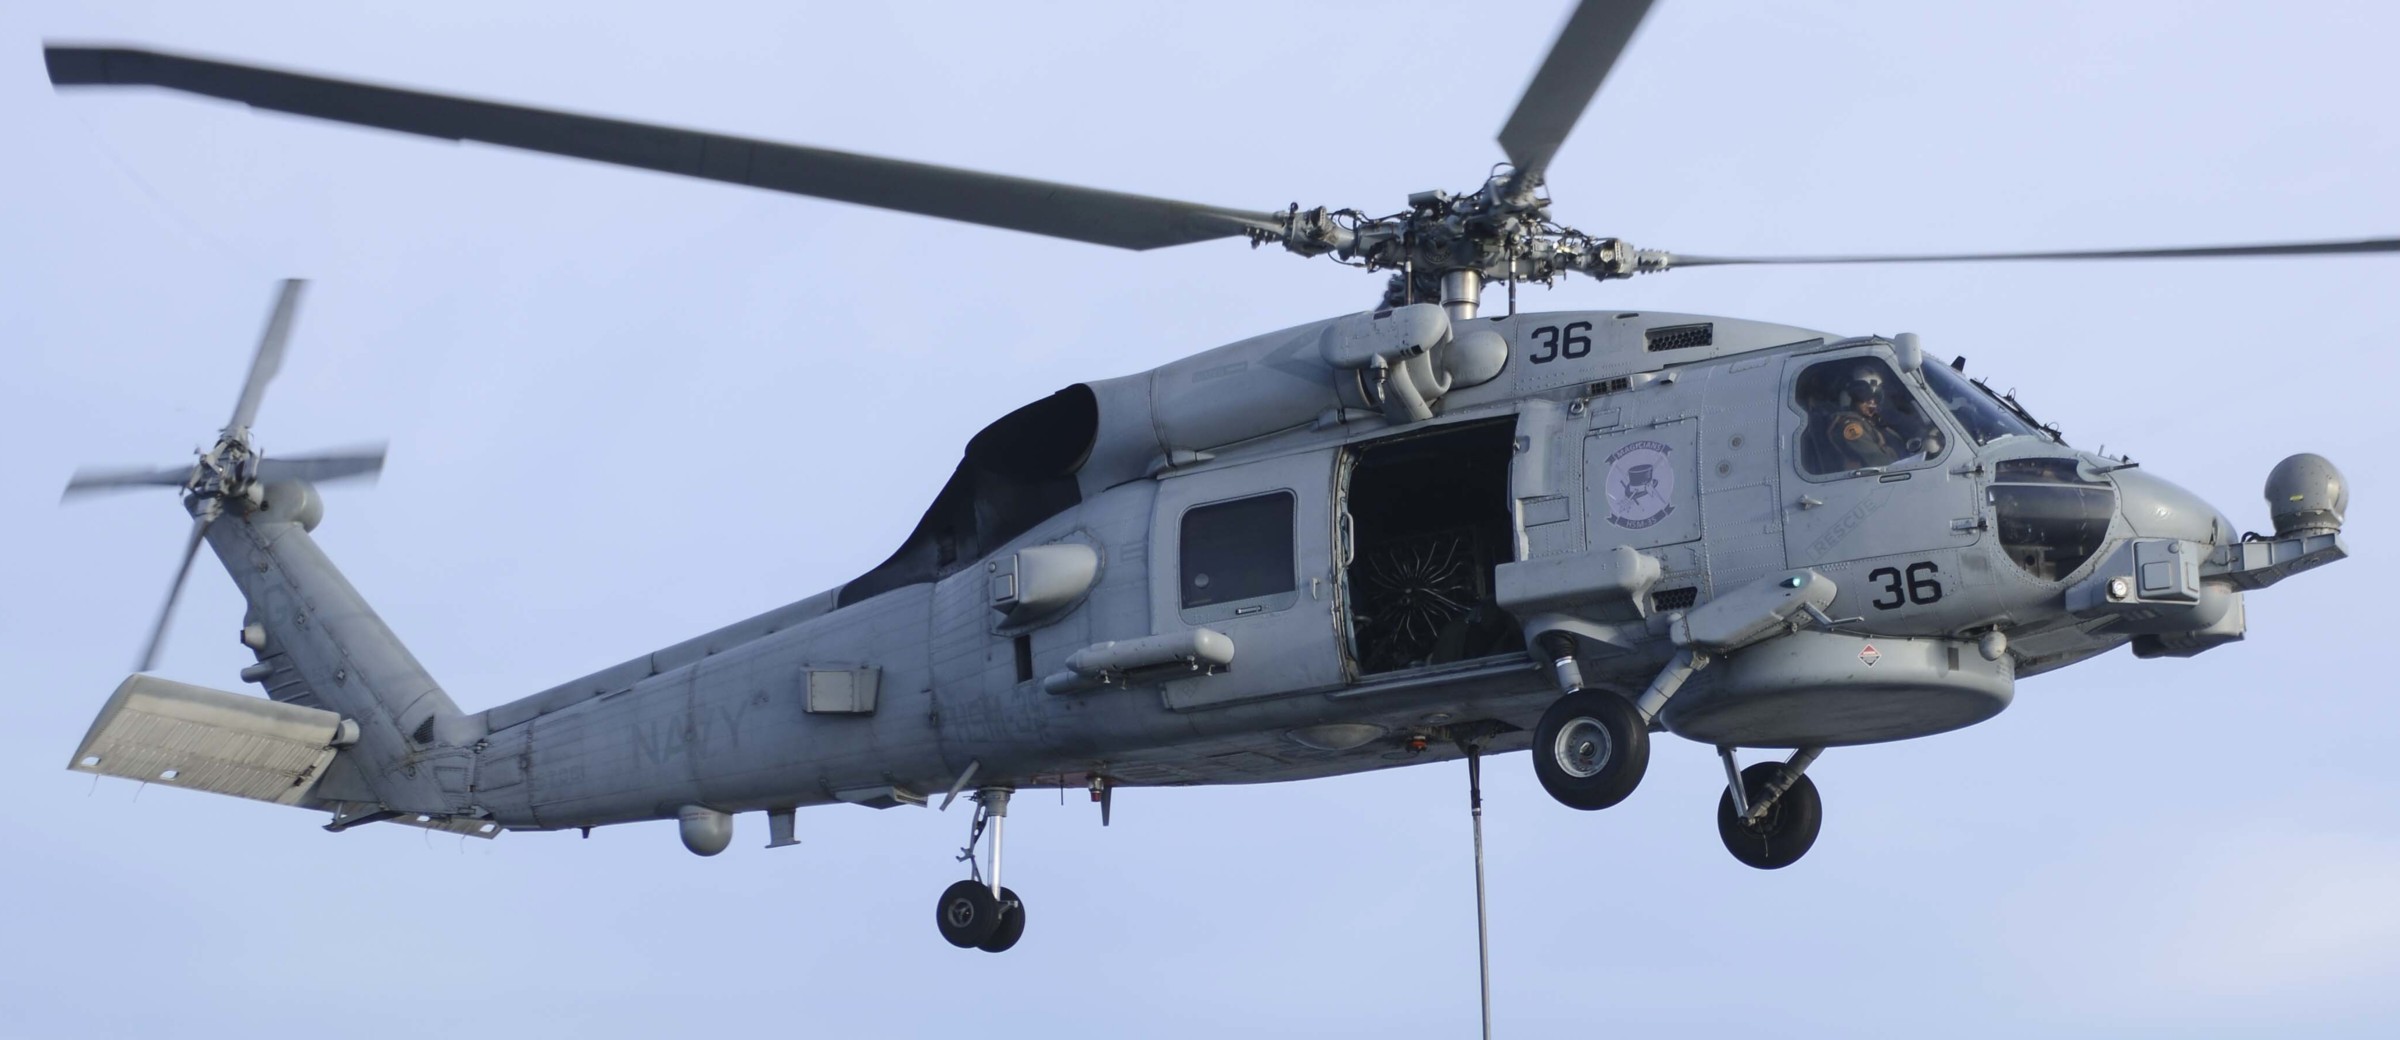 hsm-35 magicians helicopter maritime strike squadron us navy mh-60r seahawk 41